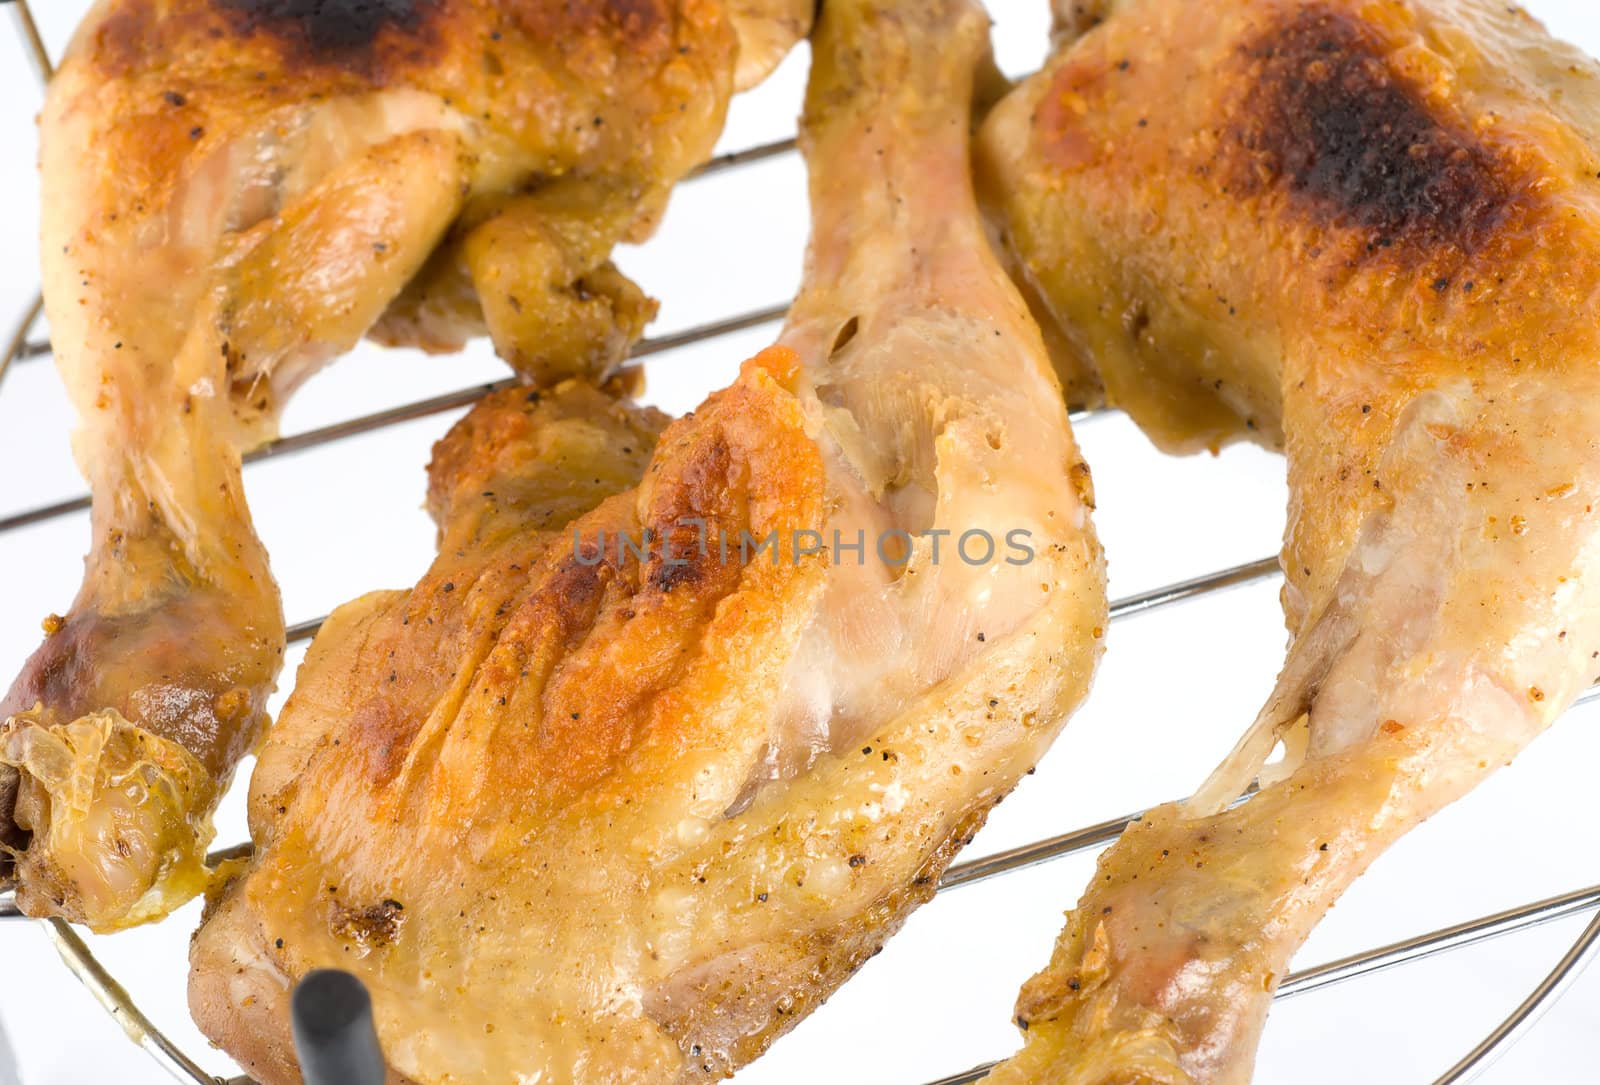 Grilled chicken legs on a white background